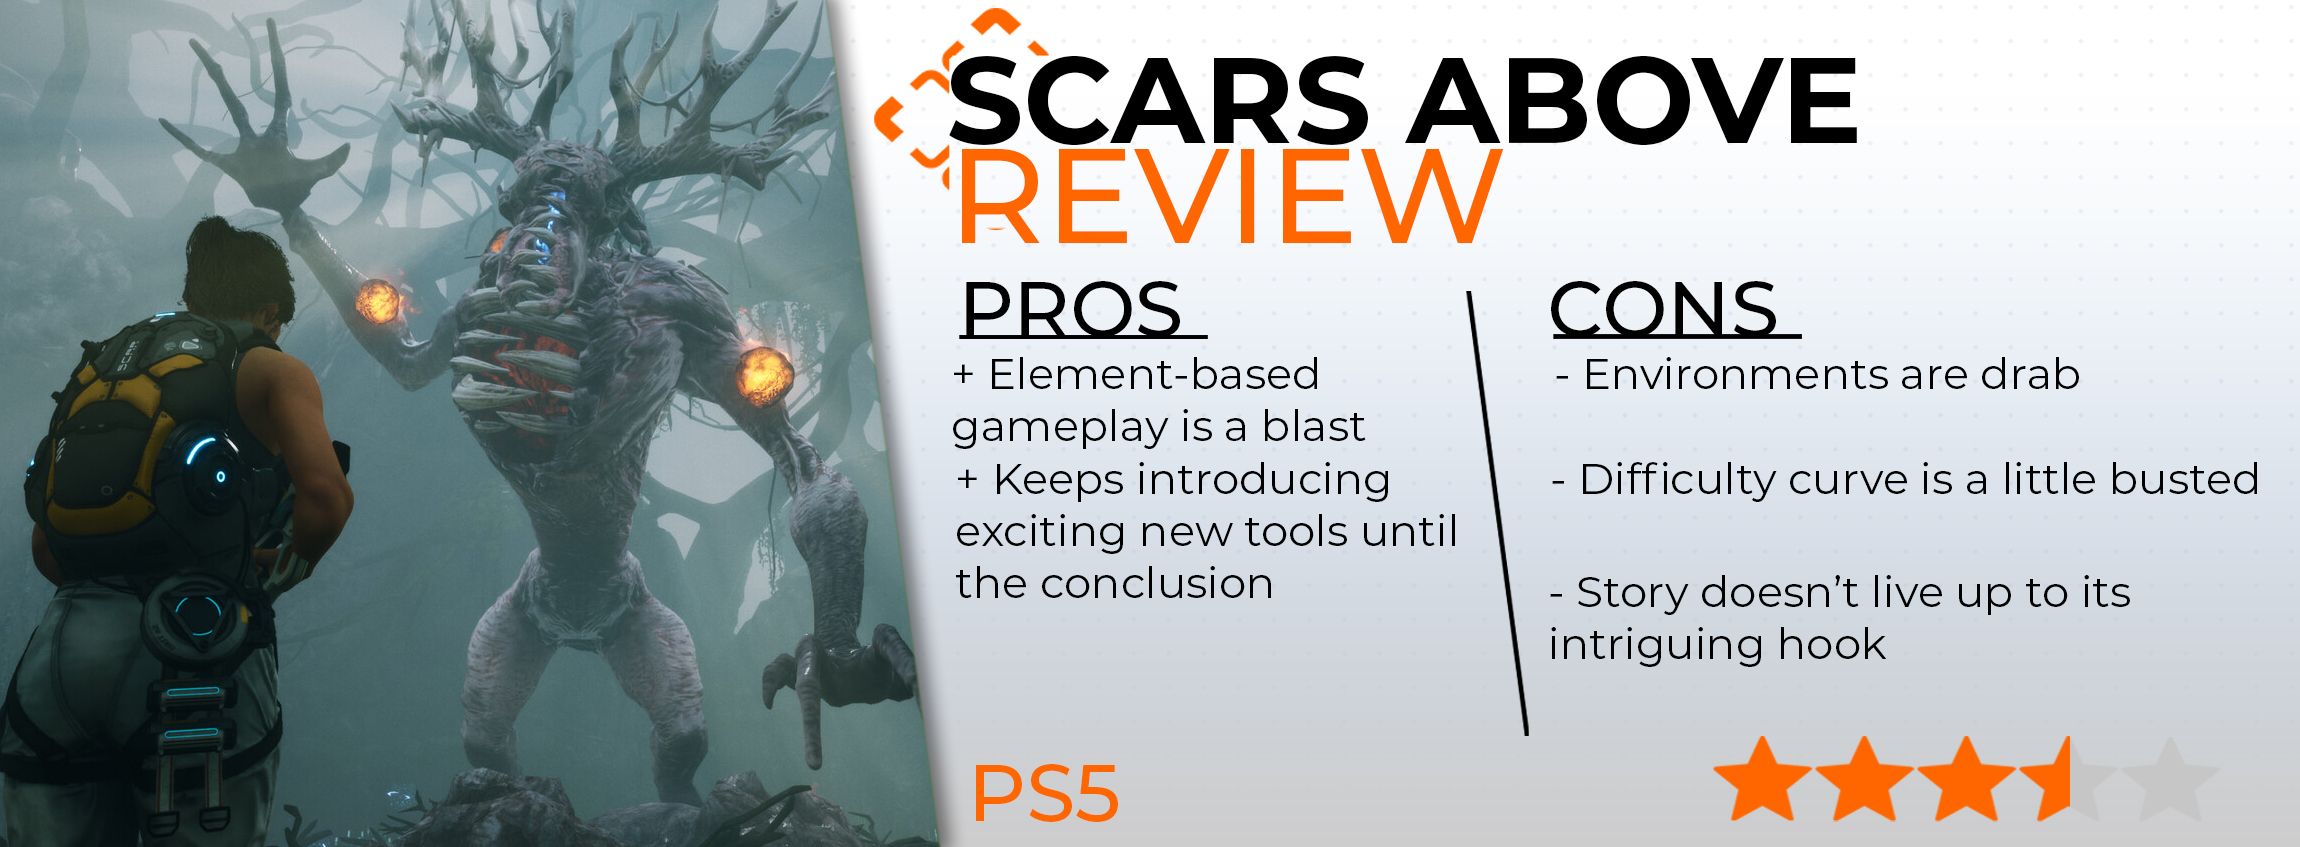 Scars Above review card